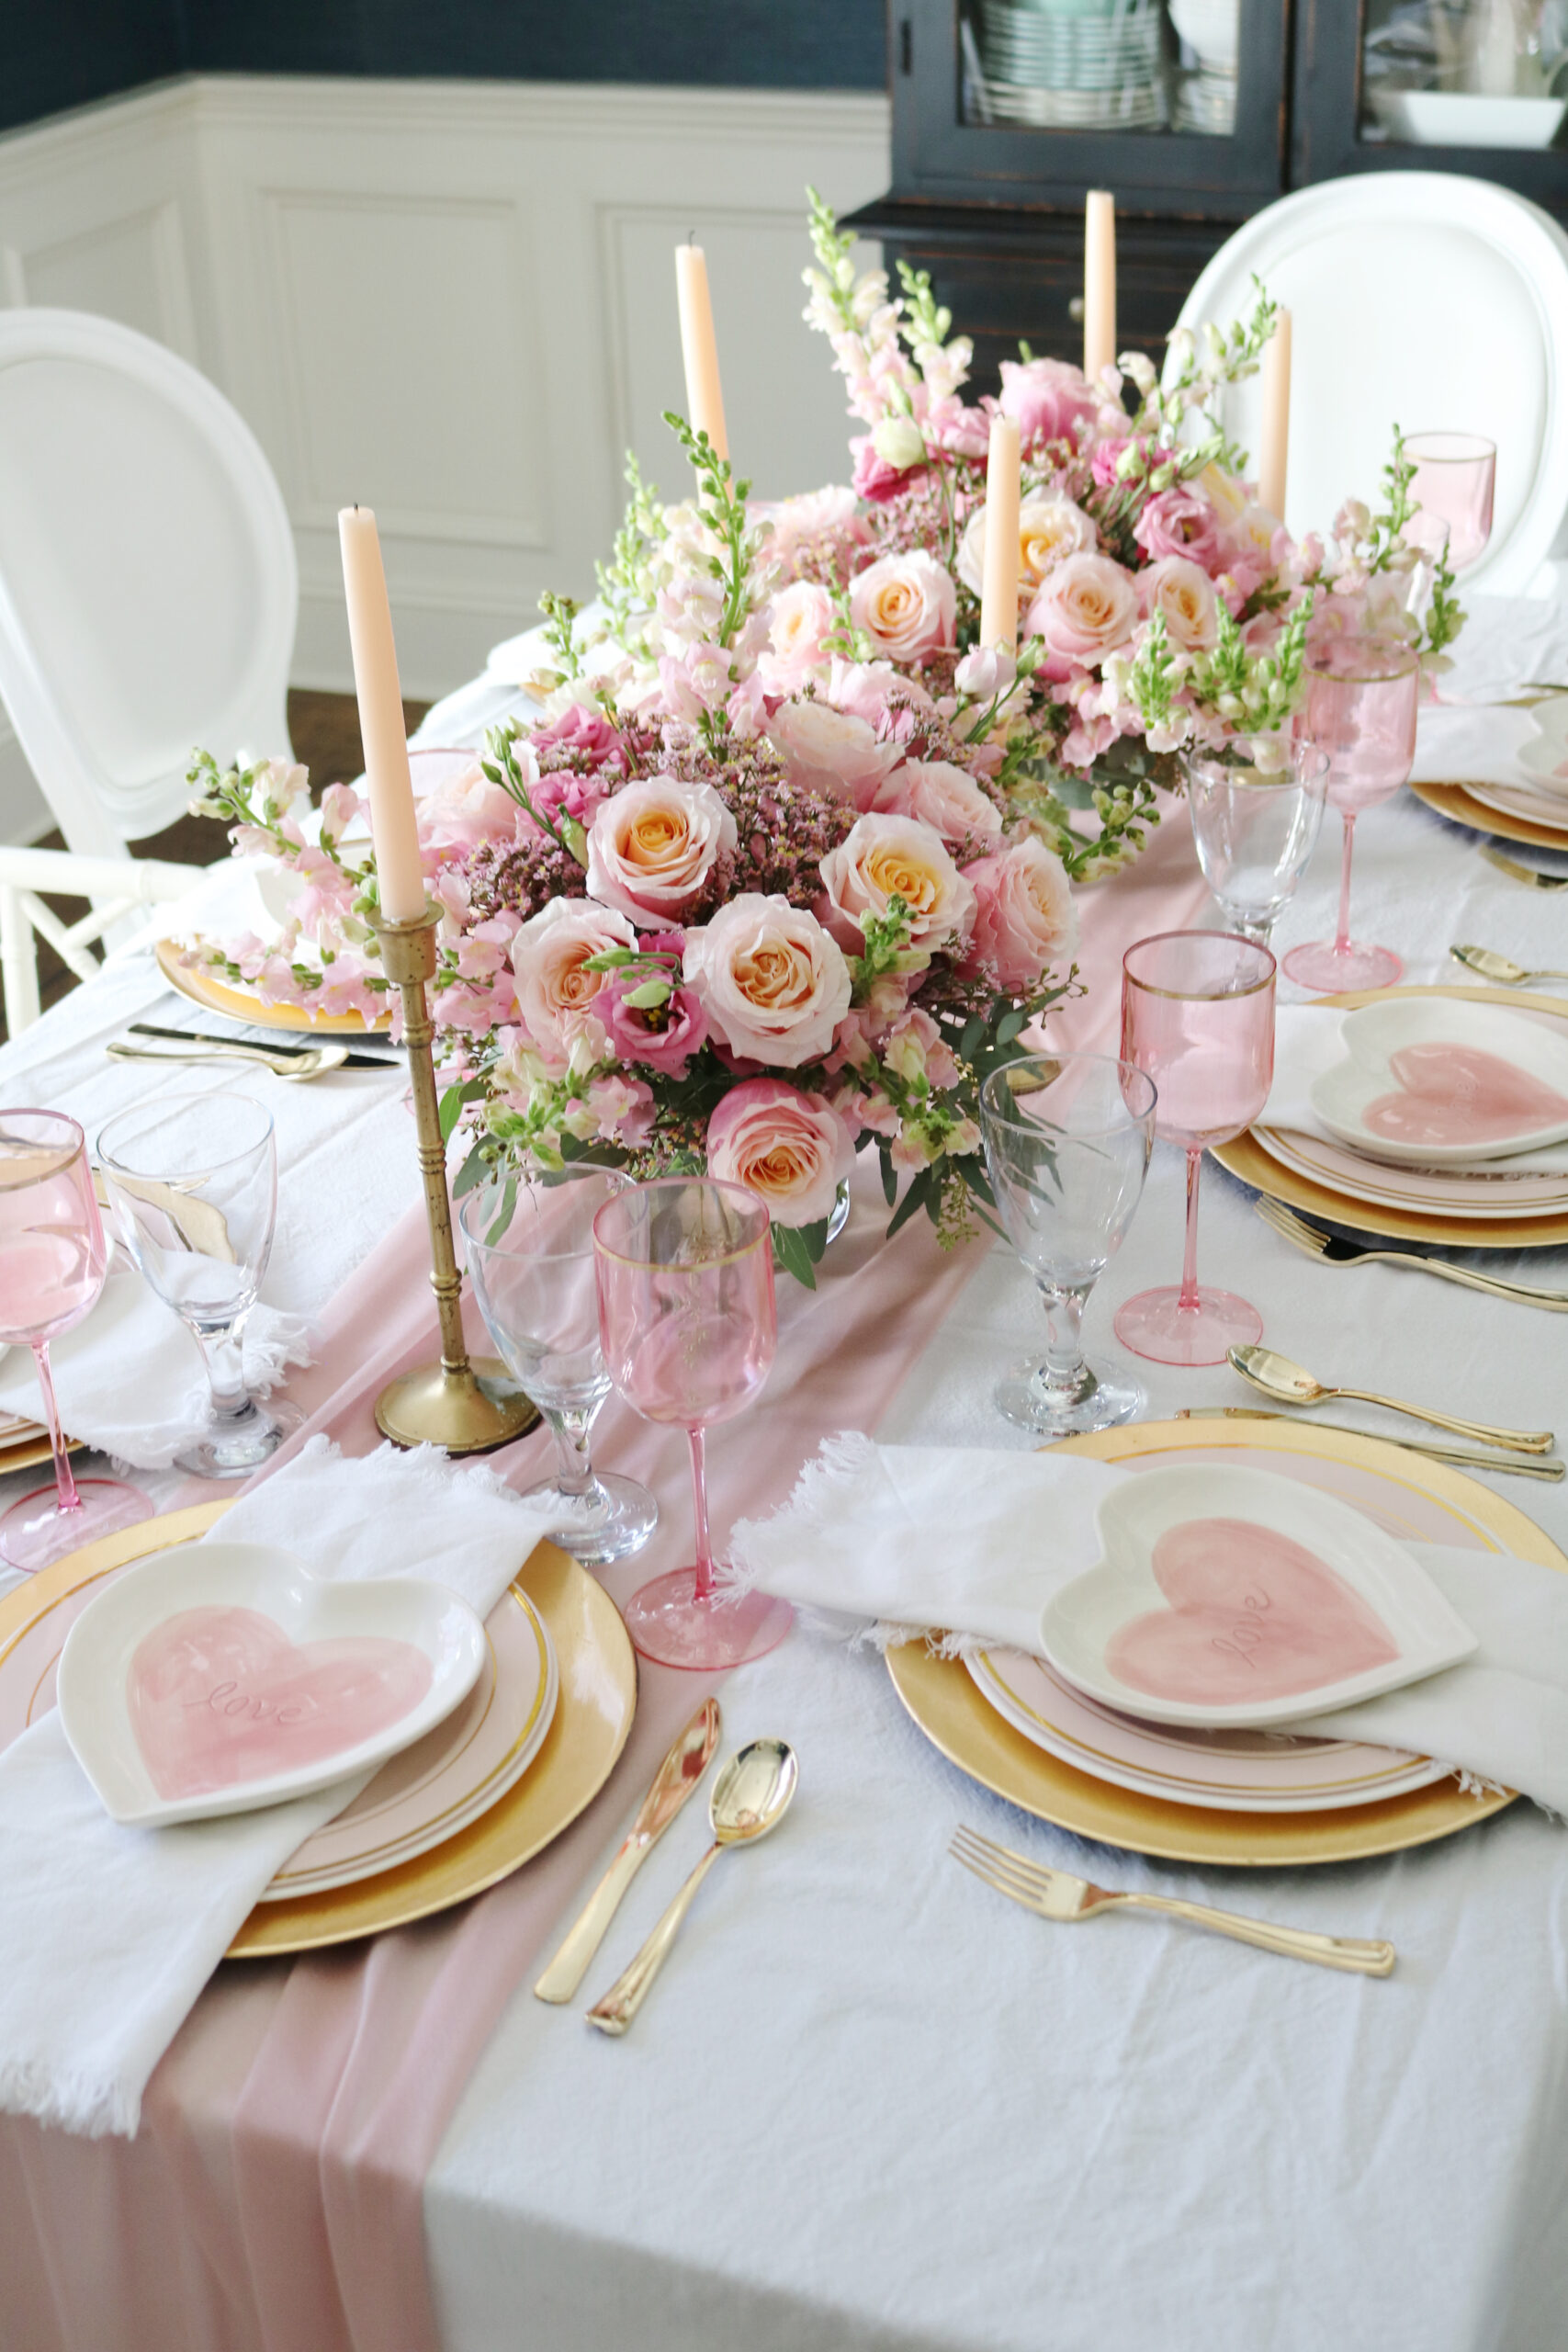 Hearts, Pink Roses and Love Written all Over this Pretty Valentine Tablescape for an intimate dinner celebrating friendships and Valentine's Day. || Darling Darleen TOP Lifestyle Blogger 